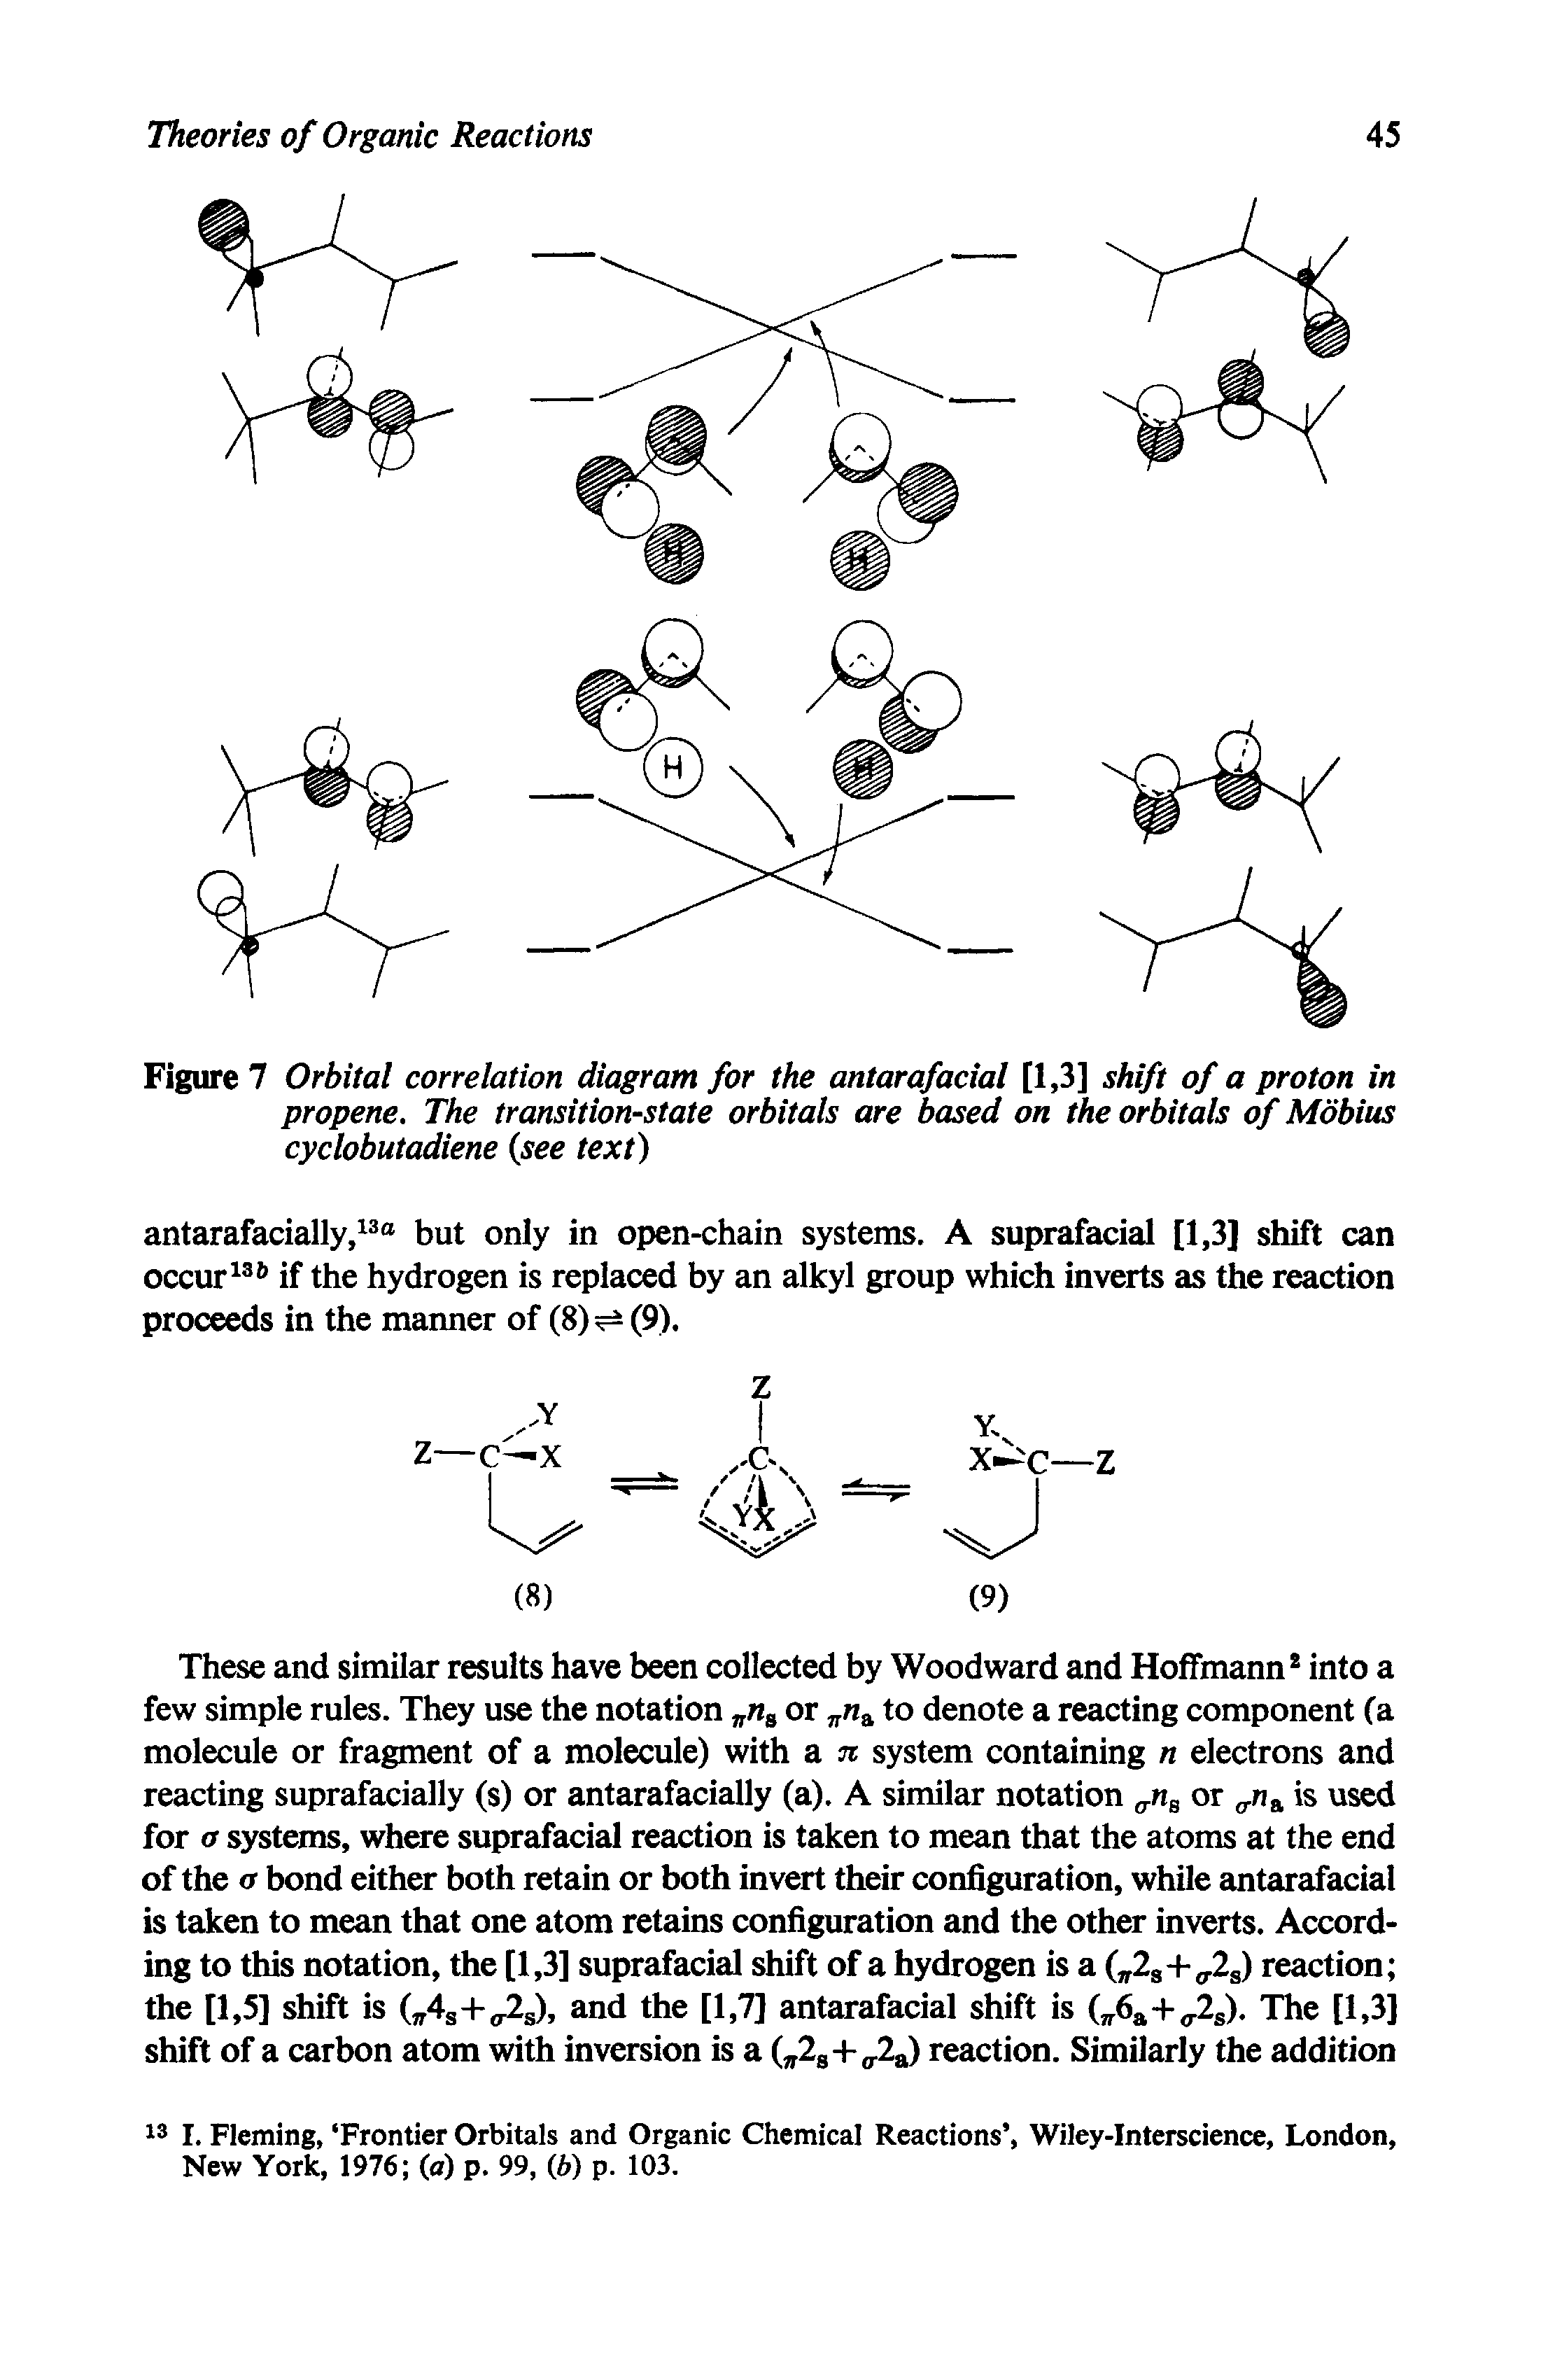 Figure 7 Orbital correlation diagram for the antarafacial [1,3] shift of a proton in propene. The transition-state orbitals are based on the orbitals of Mobius cyclobutadiene (see text)...